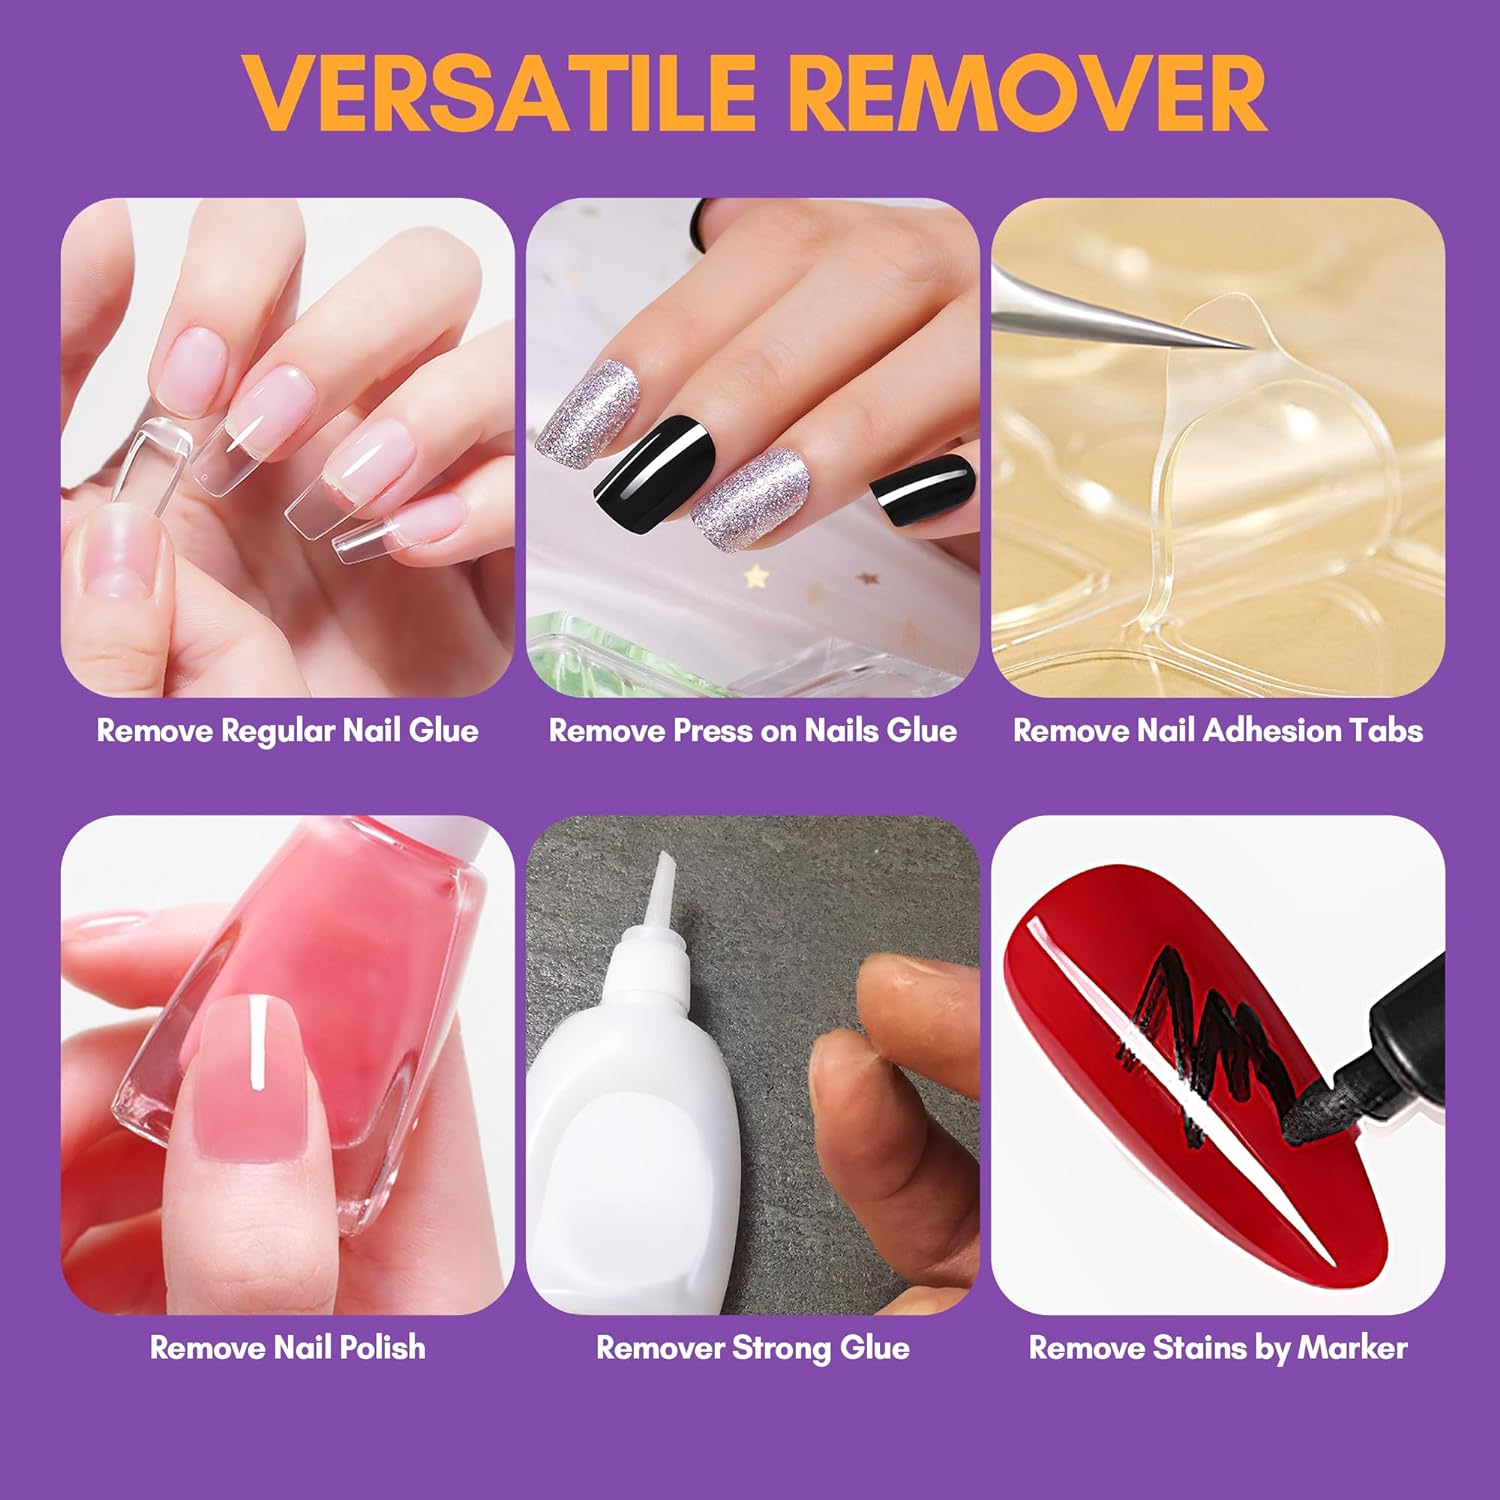 Nail Armor Over 100 Wraps - Etsy | Remove gel polish, Nail armor, Gel nails  at home